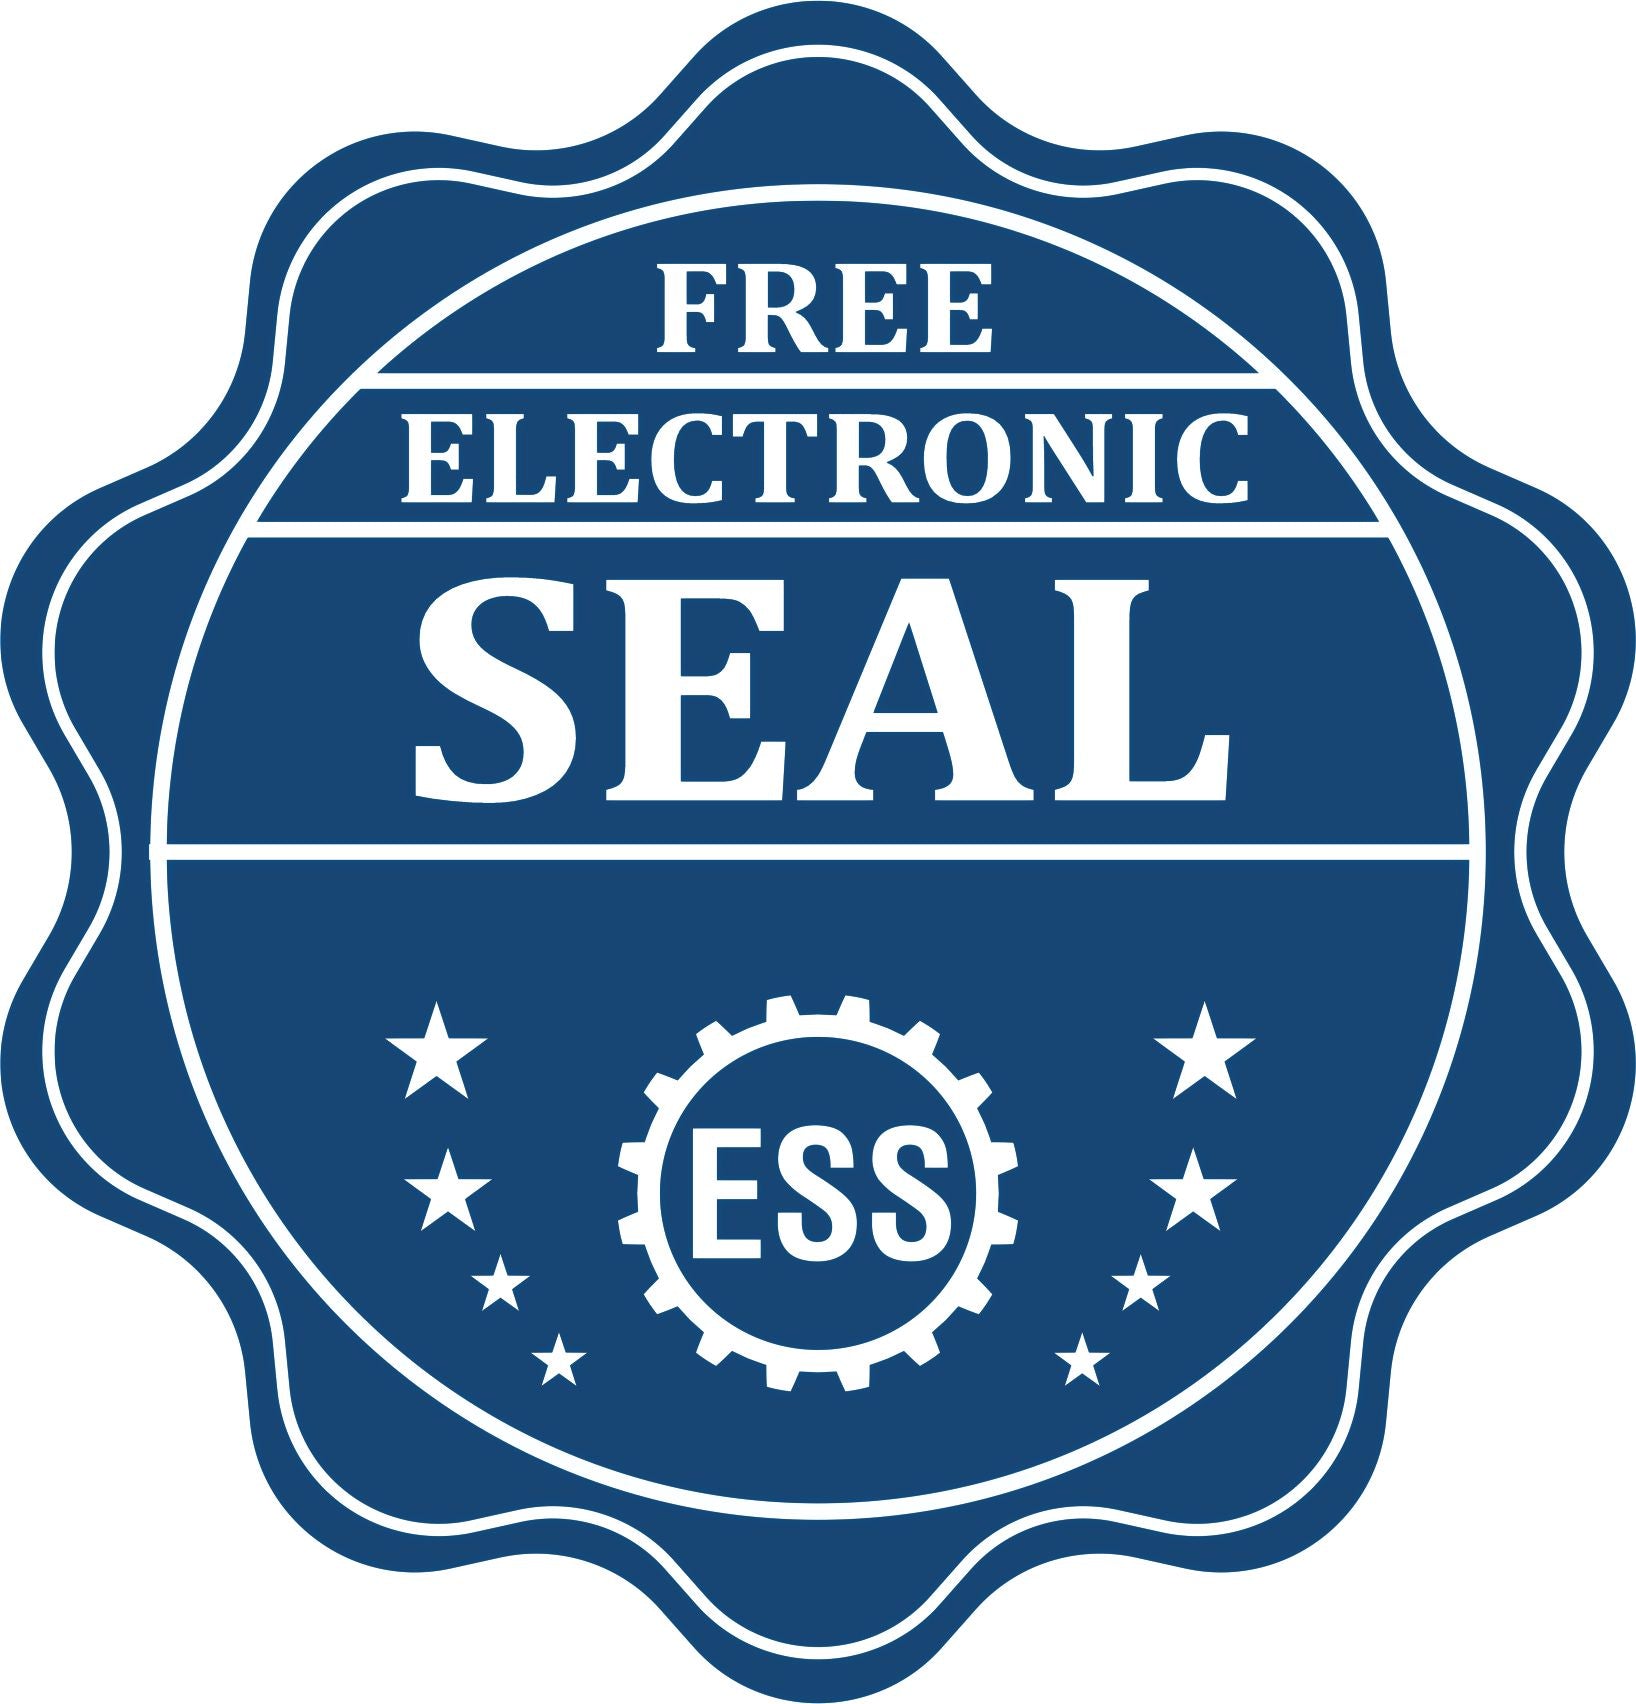 A badge showing a free electronic seal for the Florida Geologist Desk Seal with stars and the ESS gear on the emblem.